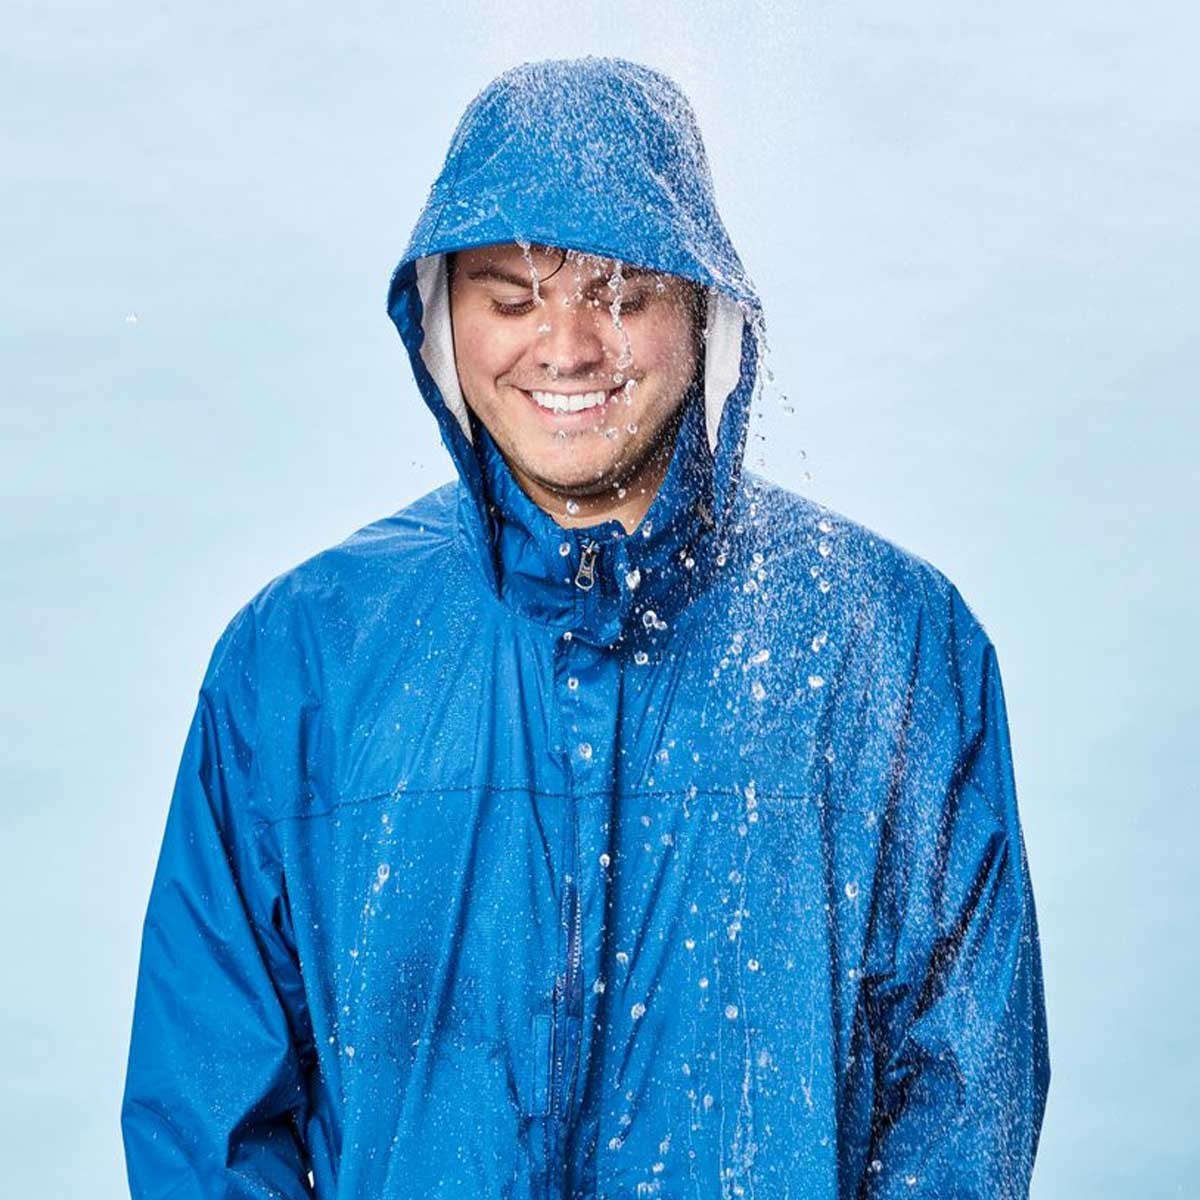 Rain Jackets Manufacturers in Cherepovets